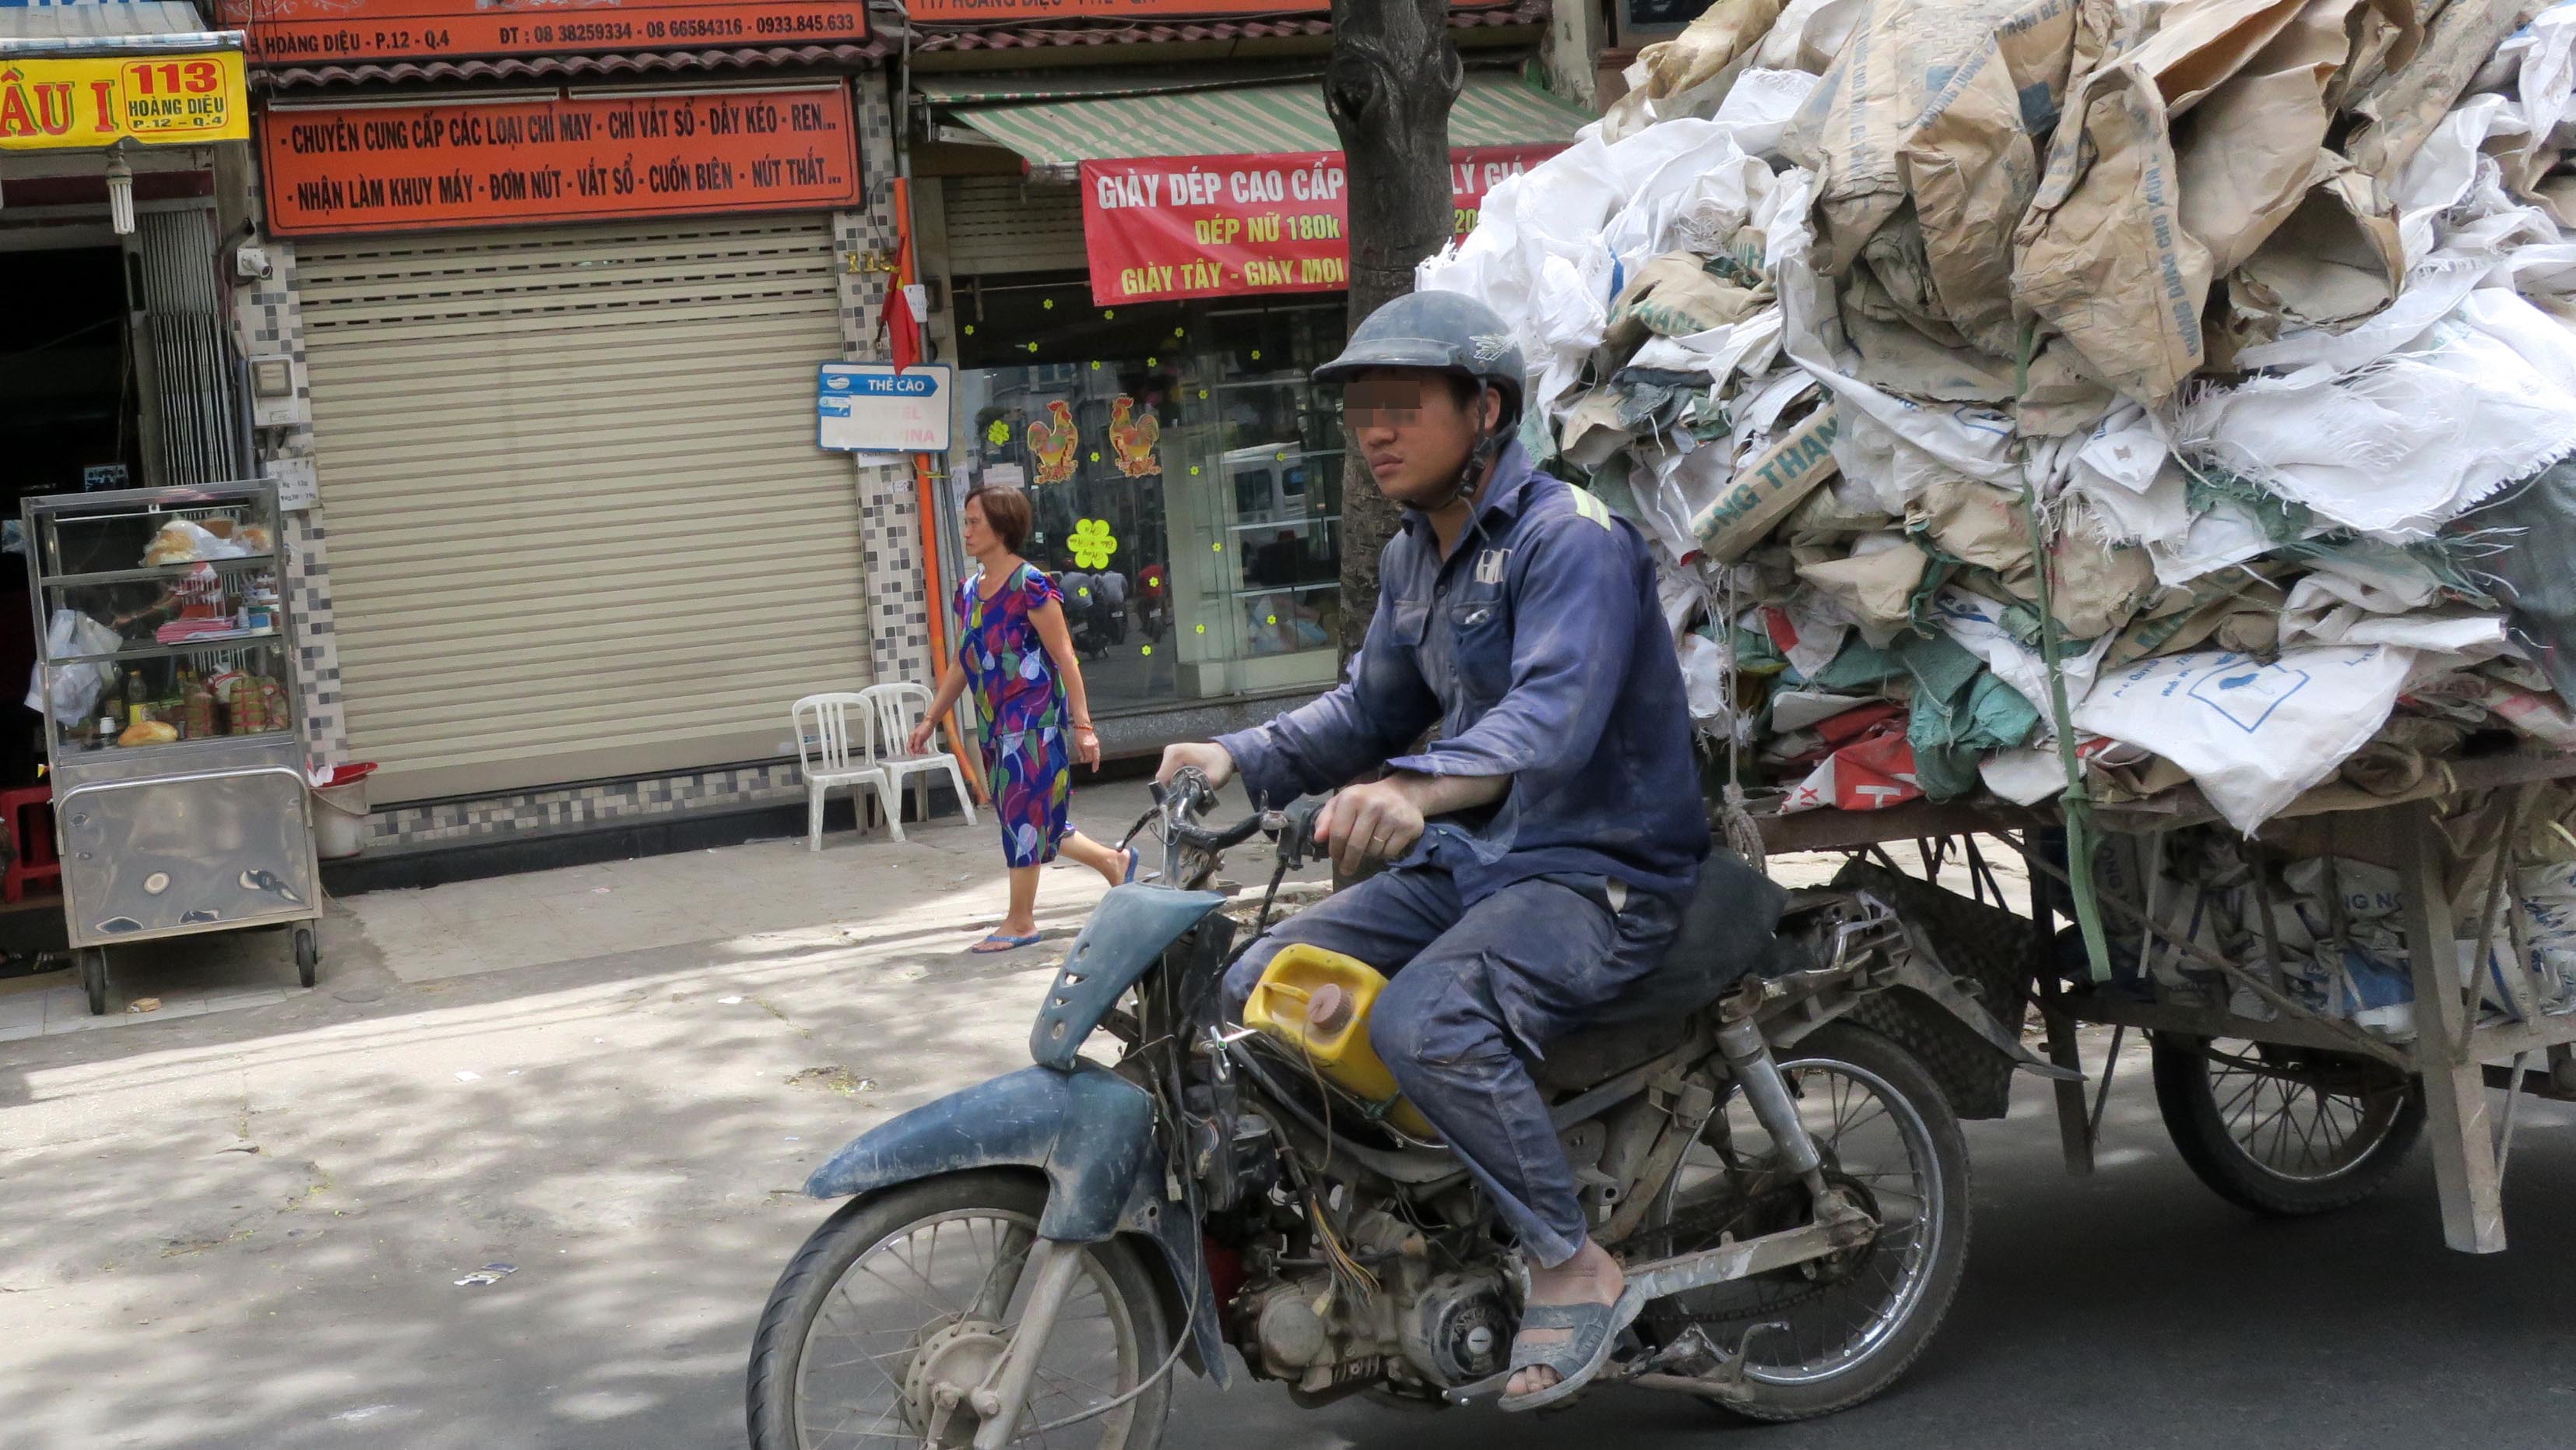 A man rides a ramshackle motorbike pulling bags on a cart as part of his daily job. Photo: Tuoi Tre